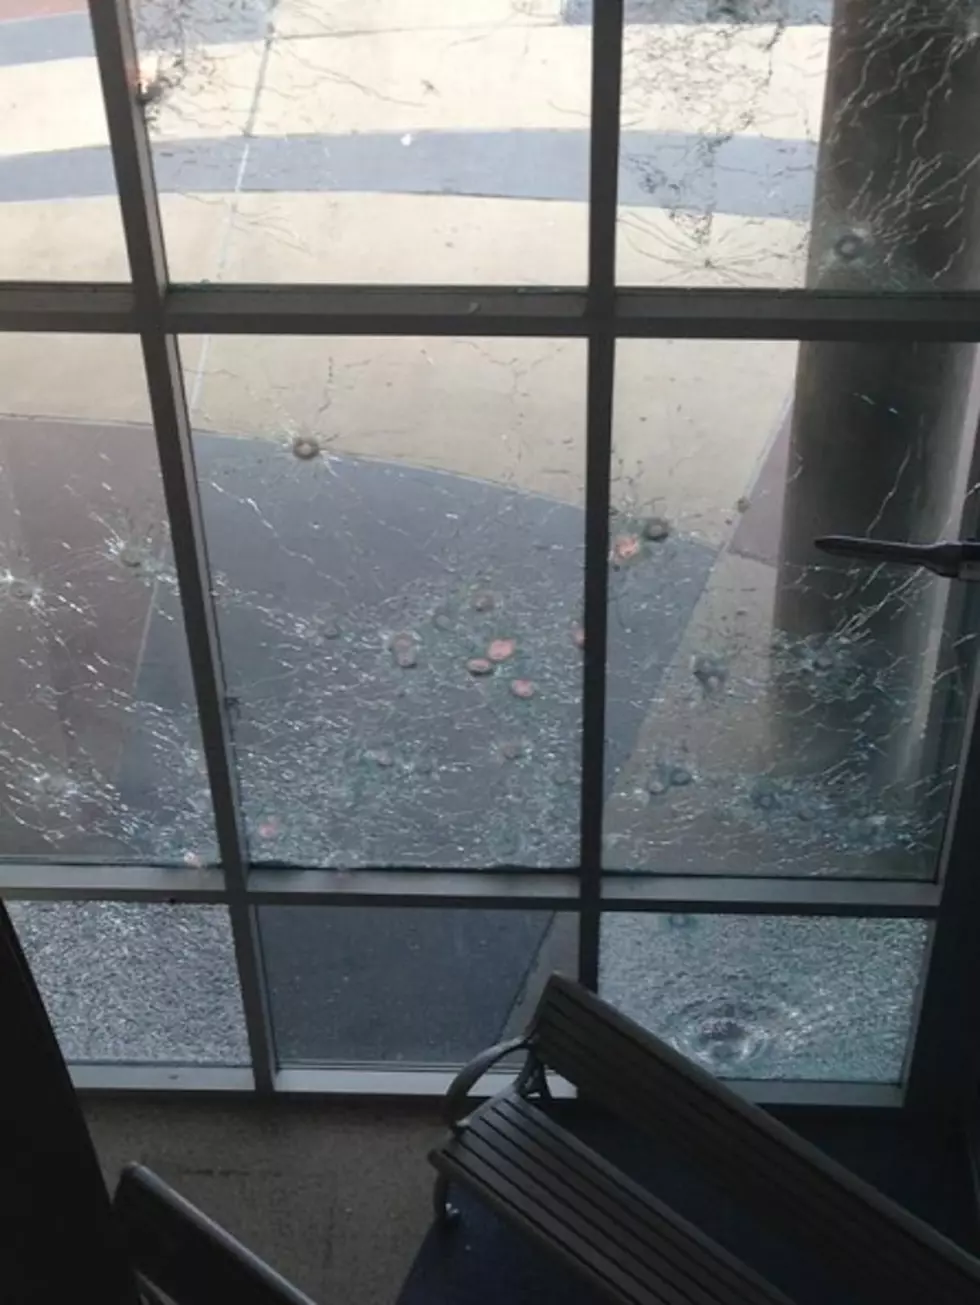 Man Survived Being Hit By Falling Glass Panel [VIDEO]